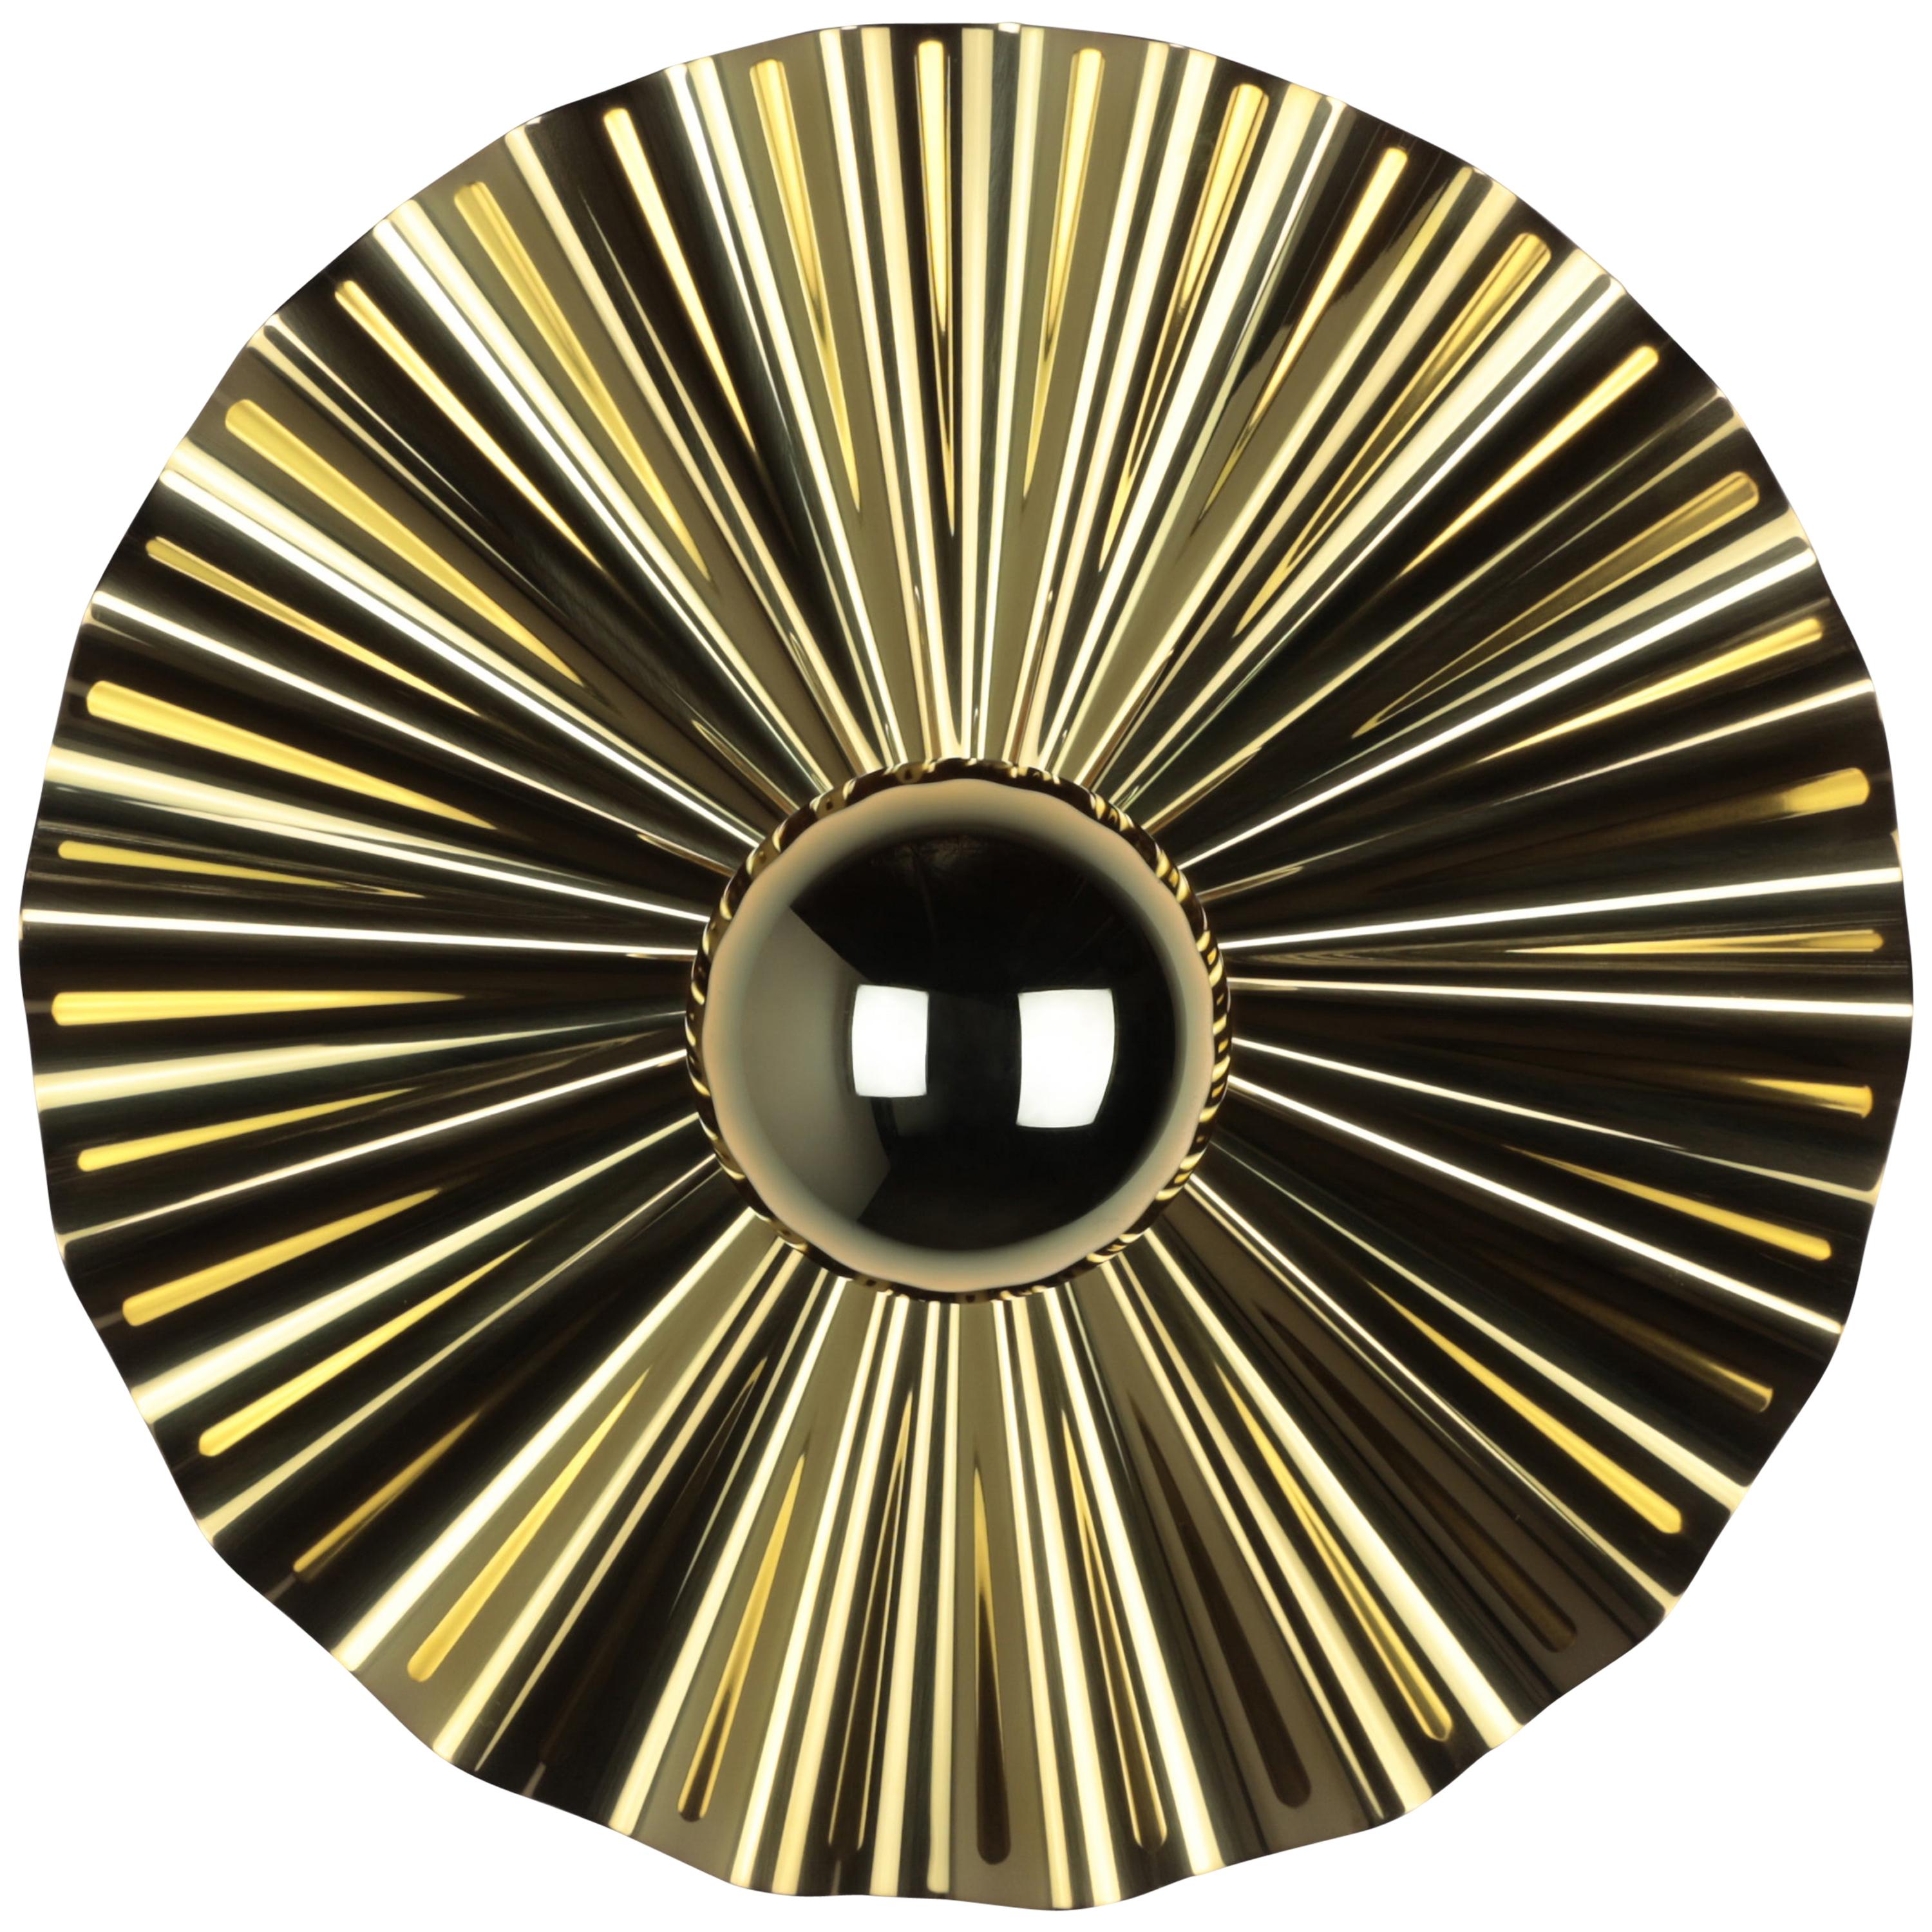 Starburst Sconce, Gold with Gold Dipped Bulb by Christopher Kreiling